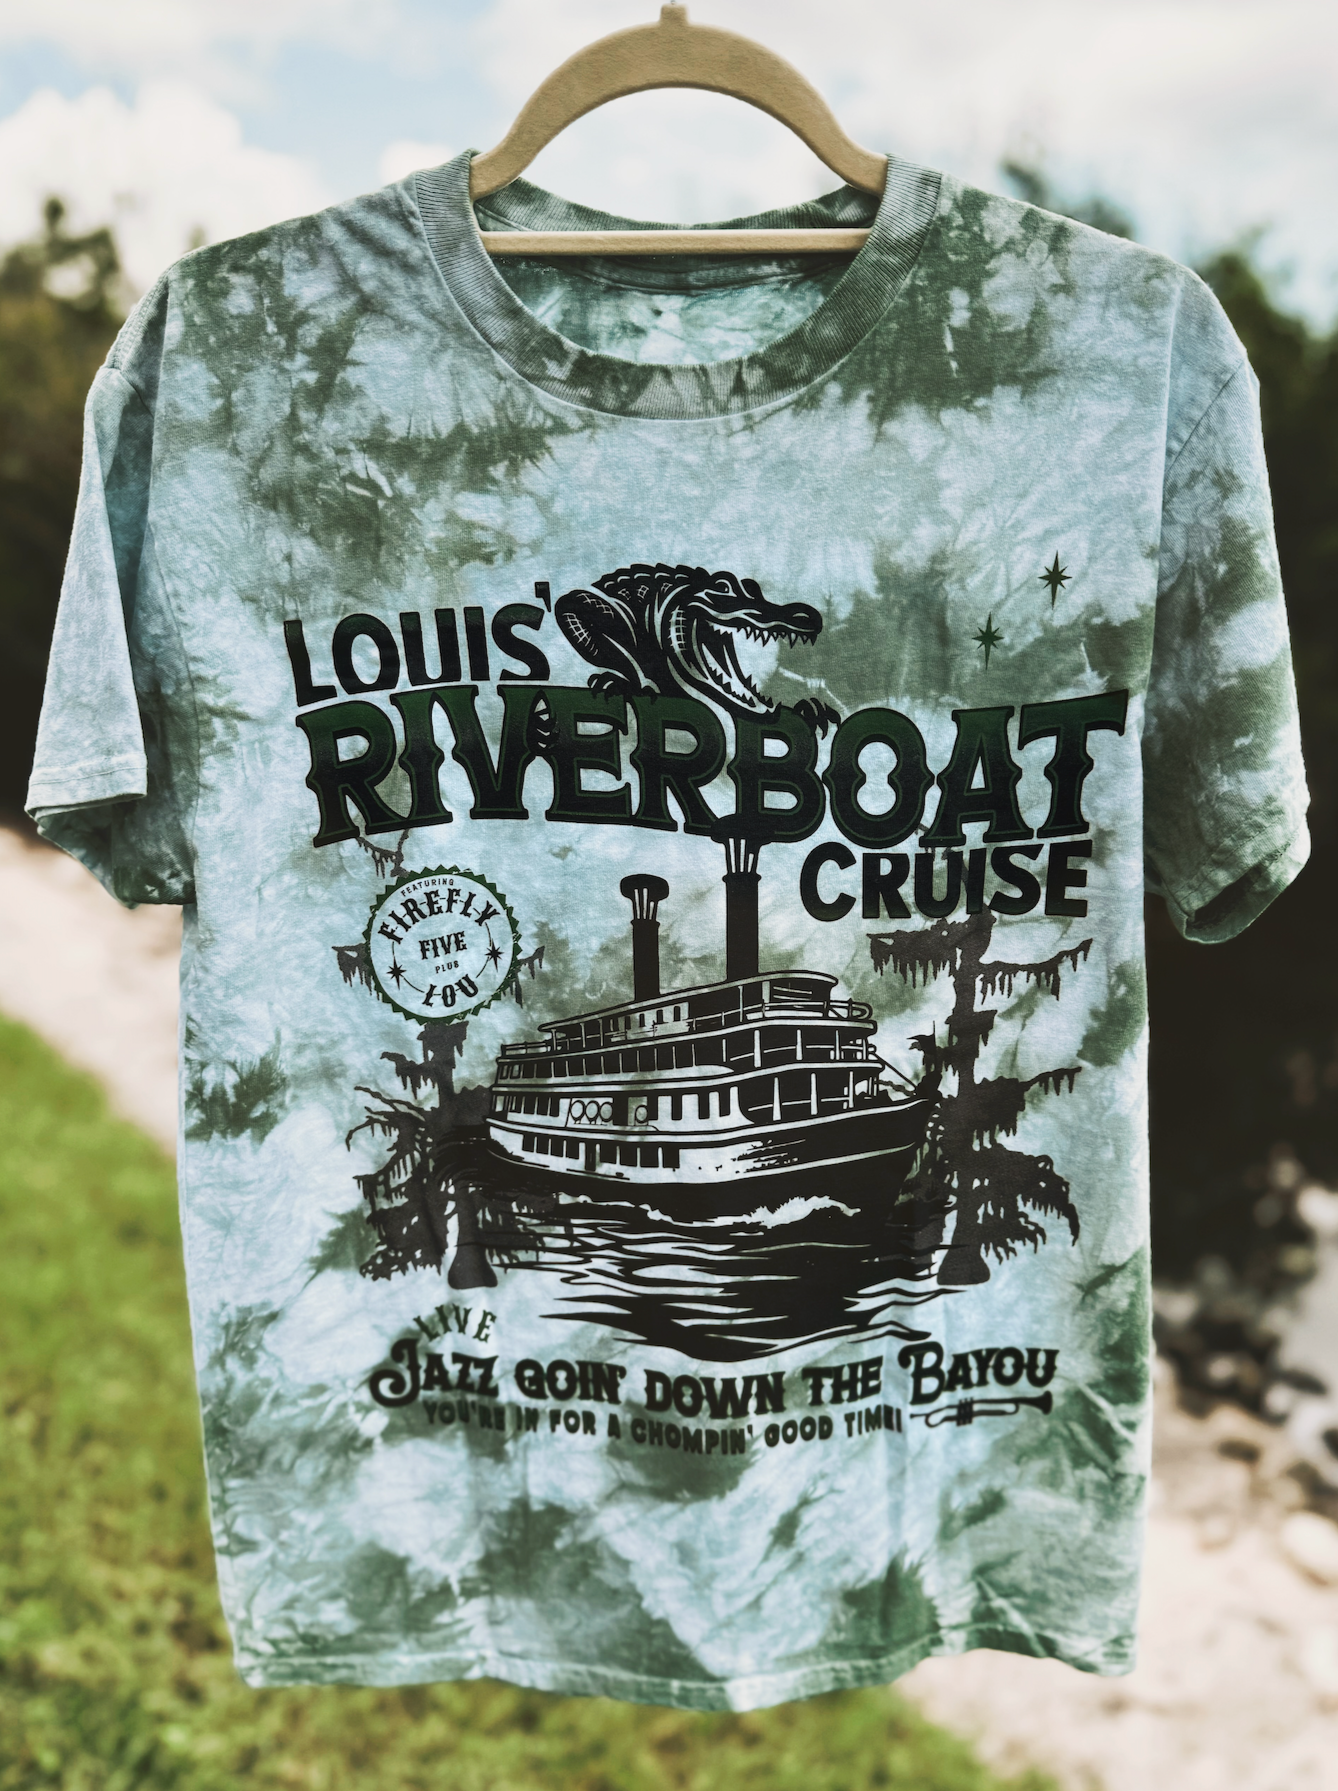 Louis Riverboat Cruise Tie Dye Shirt (Limited Edition)